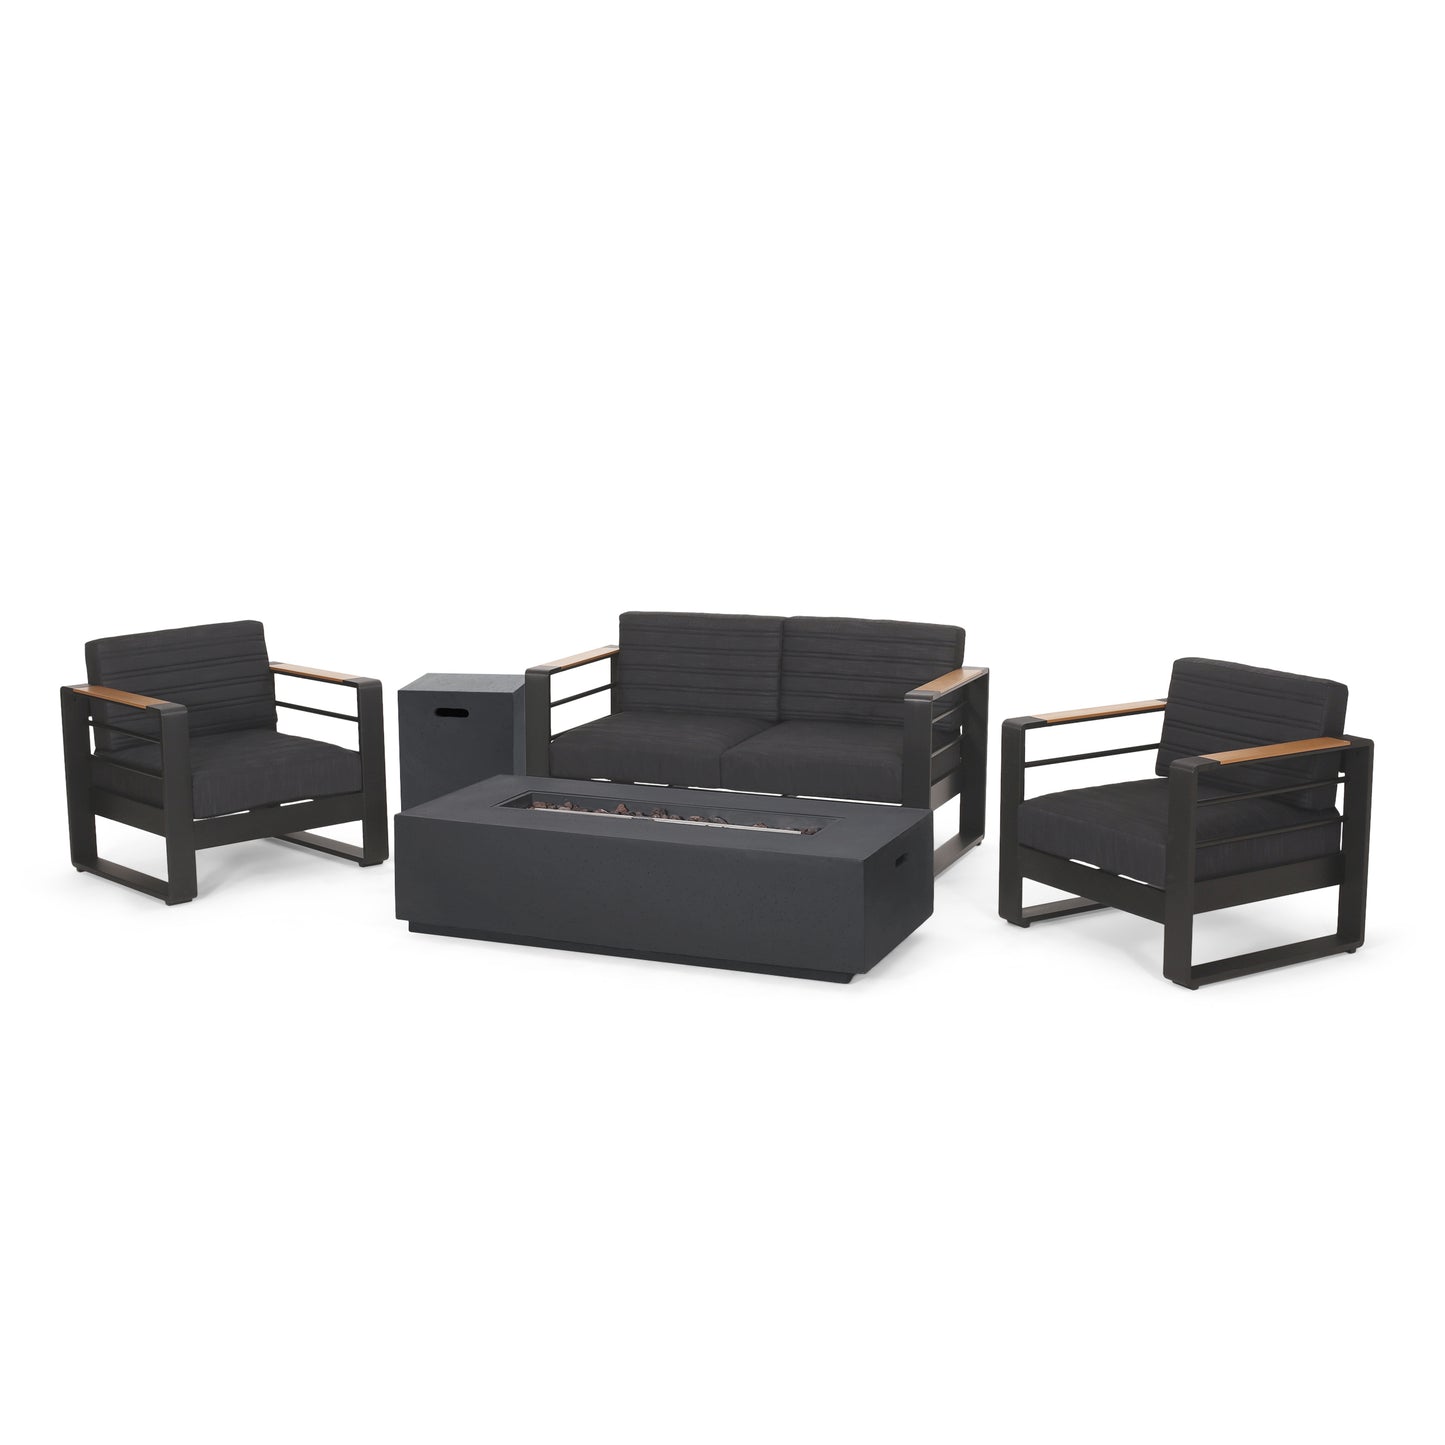 Neffs Outdoor Aluminum 4 Seater Chat Set with Fire Pit, Black, Natural, and Dark Gray